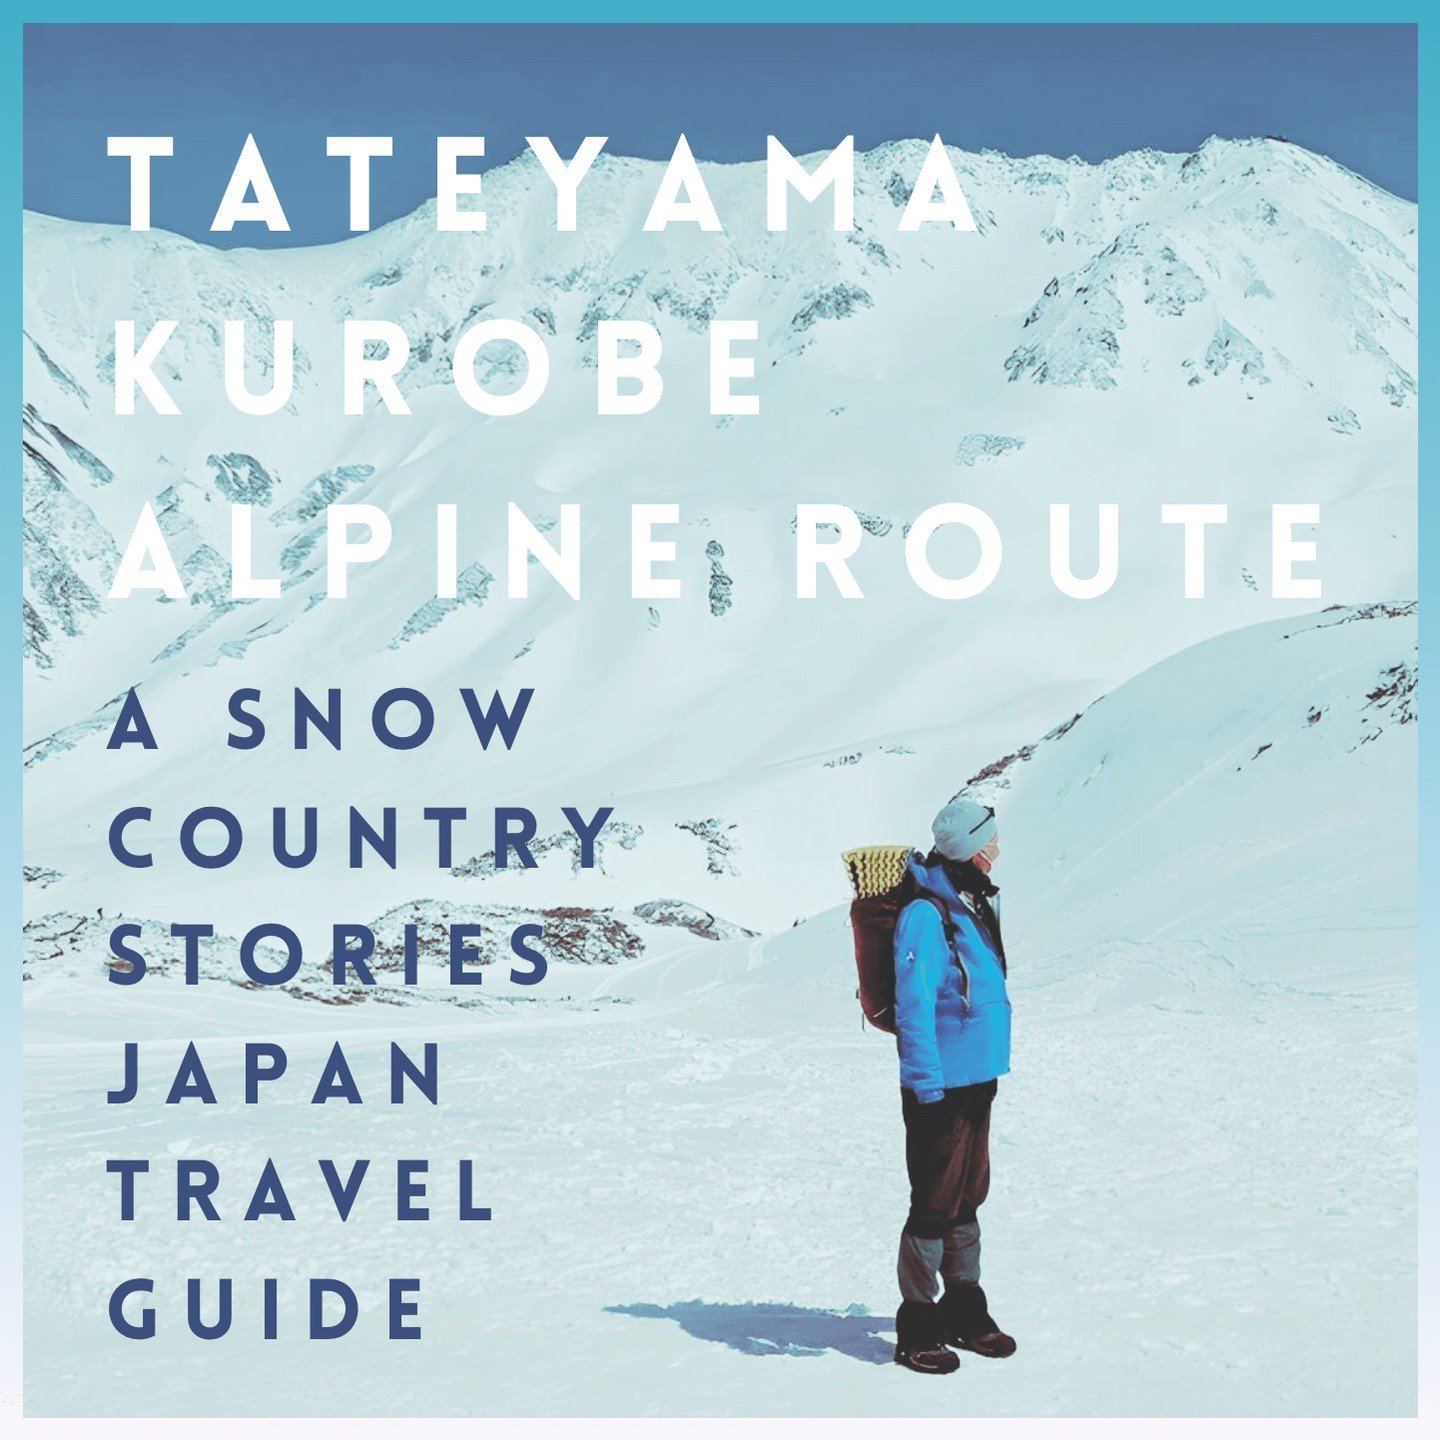 Episode 26 of the podcast is now available! In this episode, we ascend Japan's highest mountain range as we explore the Tateyama Kurobe Alpine Route. 

https://snowcountrystories.com/episodes/ep26-tateyama-kurobe-alpine-route-travel-guide

Having jus